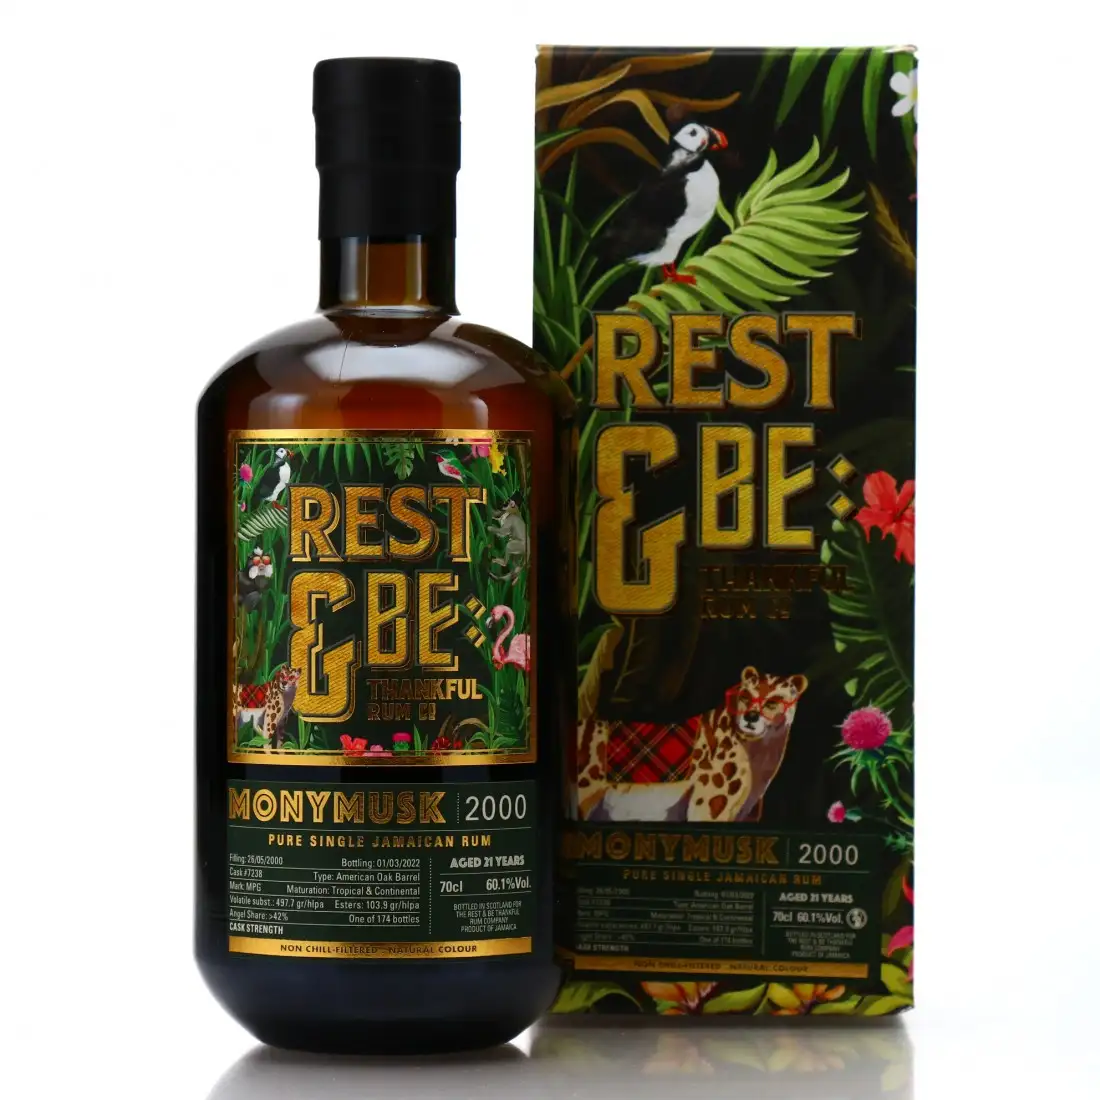 Image of the front of the bottle of the rum MPG